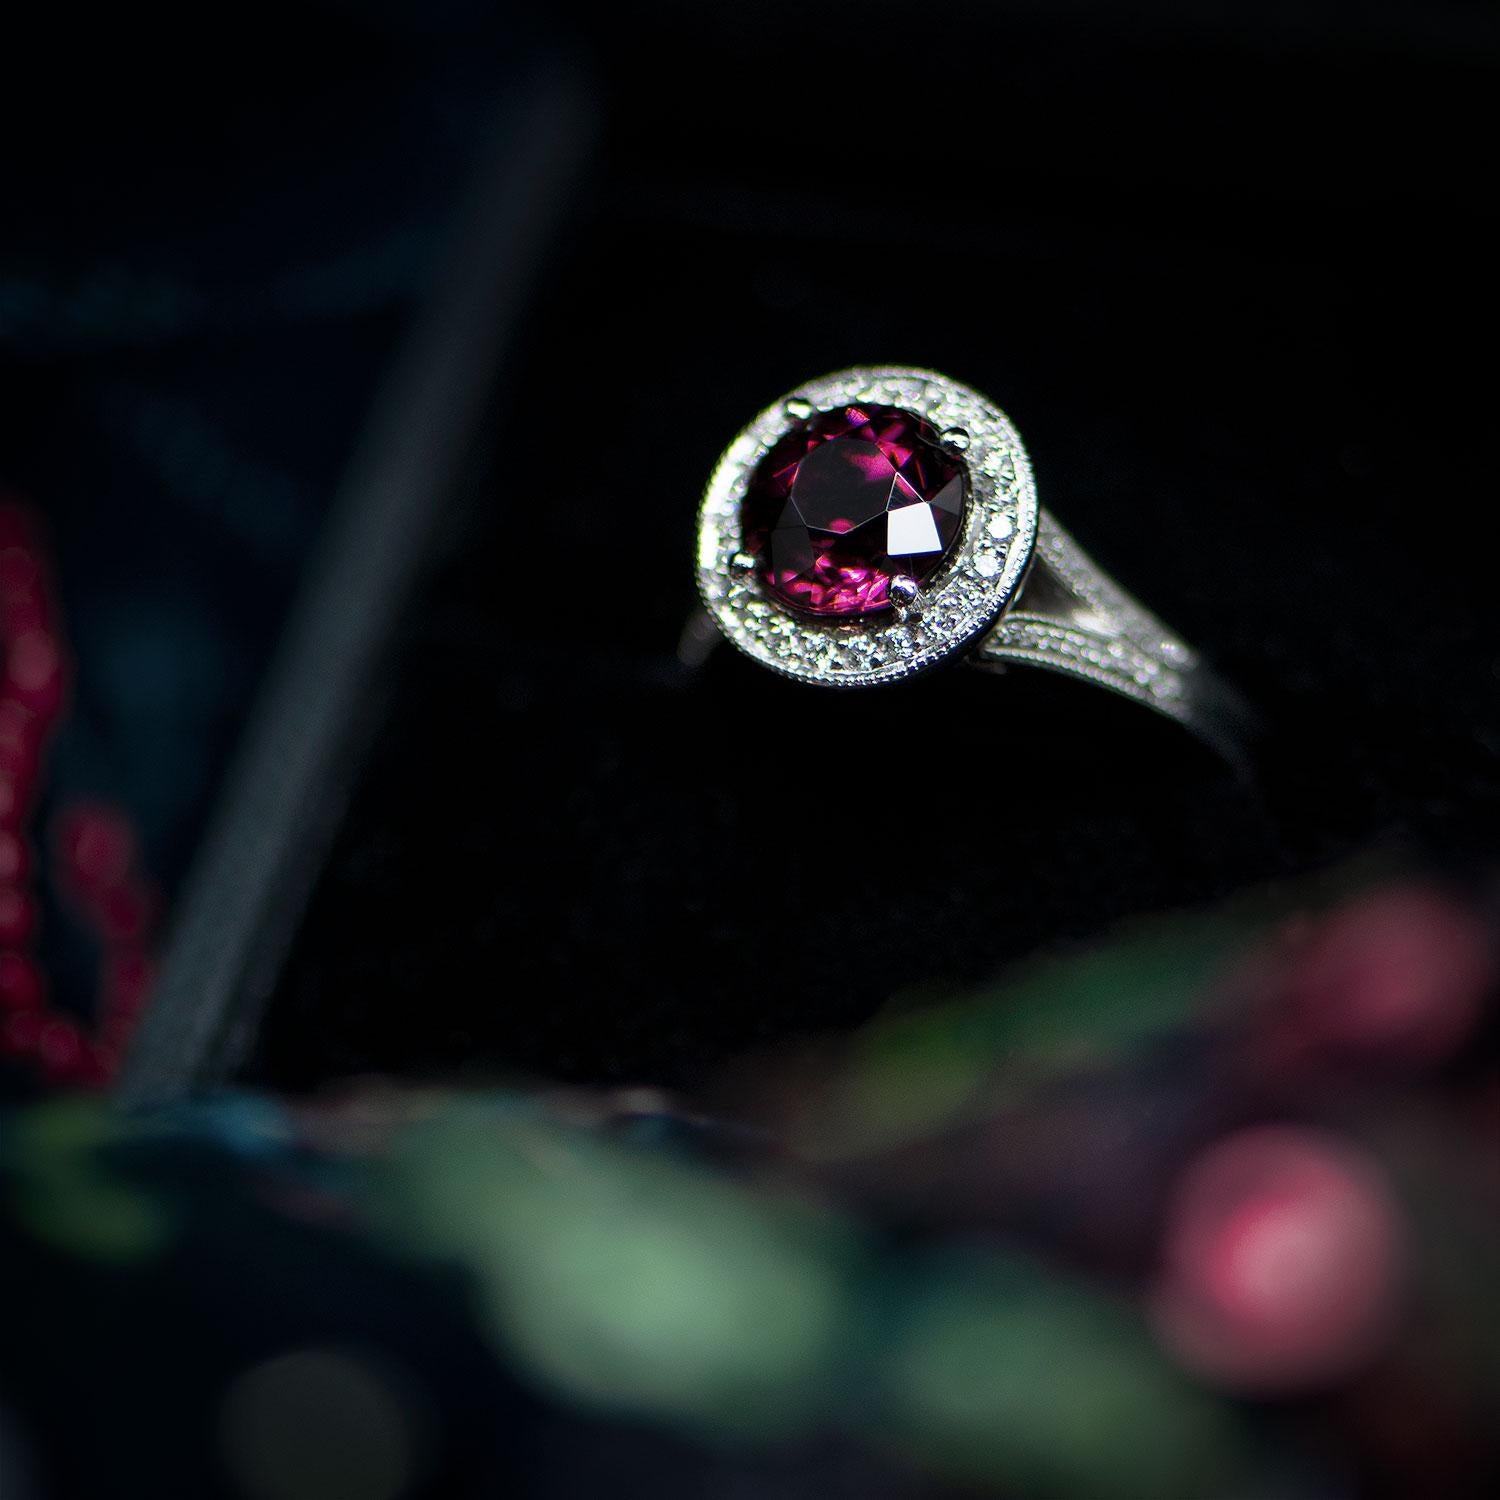 This elegant, ready-to-wear vintage-style ring features a rare and sumptuous Rubellite Tourmaline in a highly sought after, deep purple-red colour. Surrounding the stone is a ring of sparkling diamonds in an elegant  platinum milgrain cluster